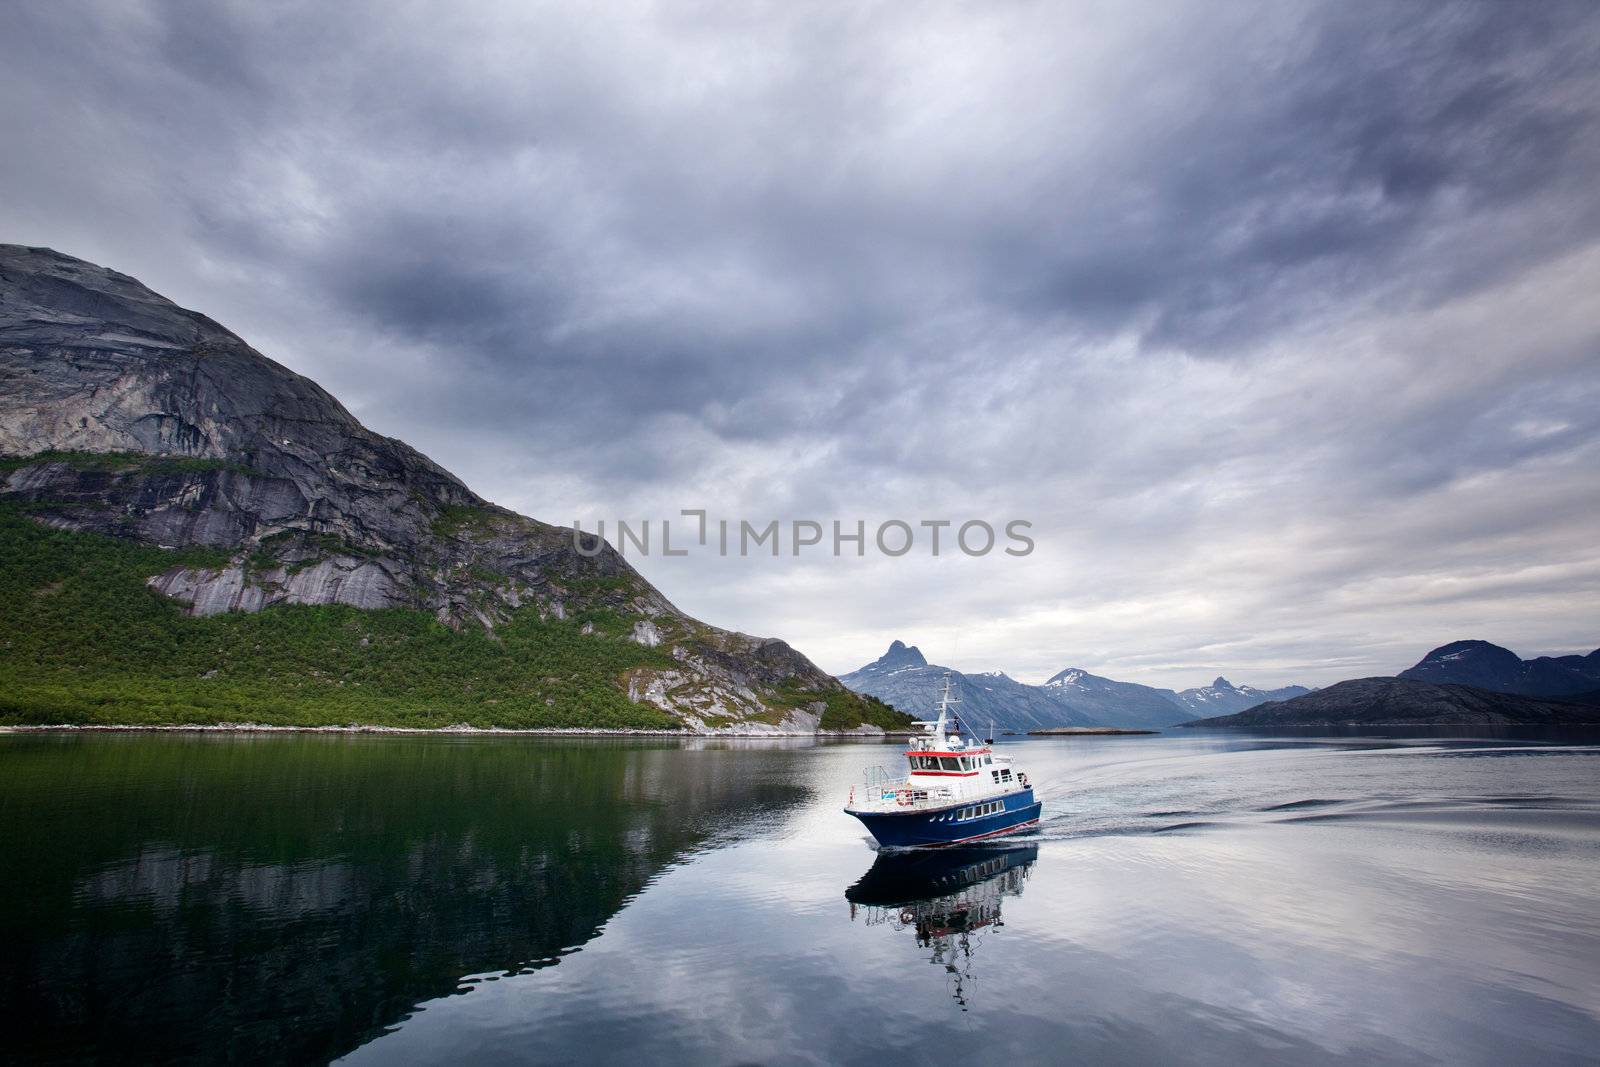 A small ferry in northern Norway on the ocean